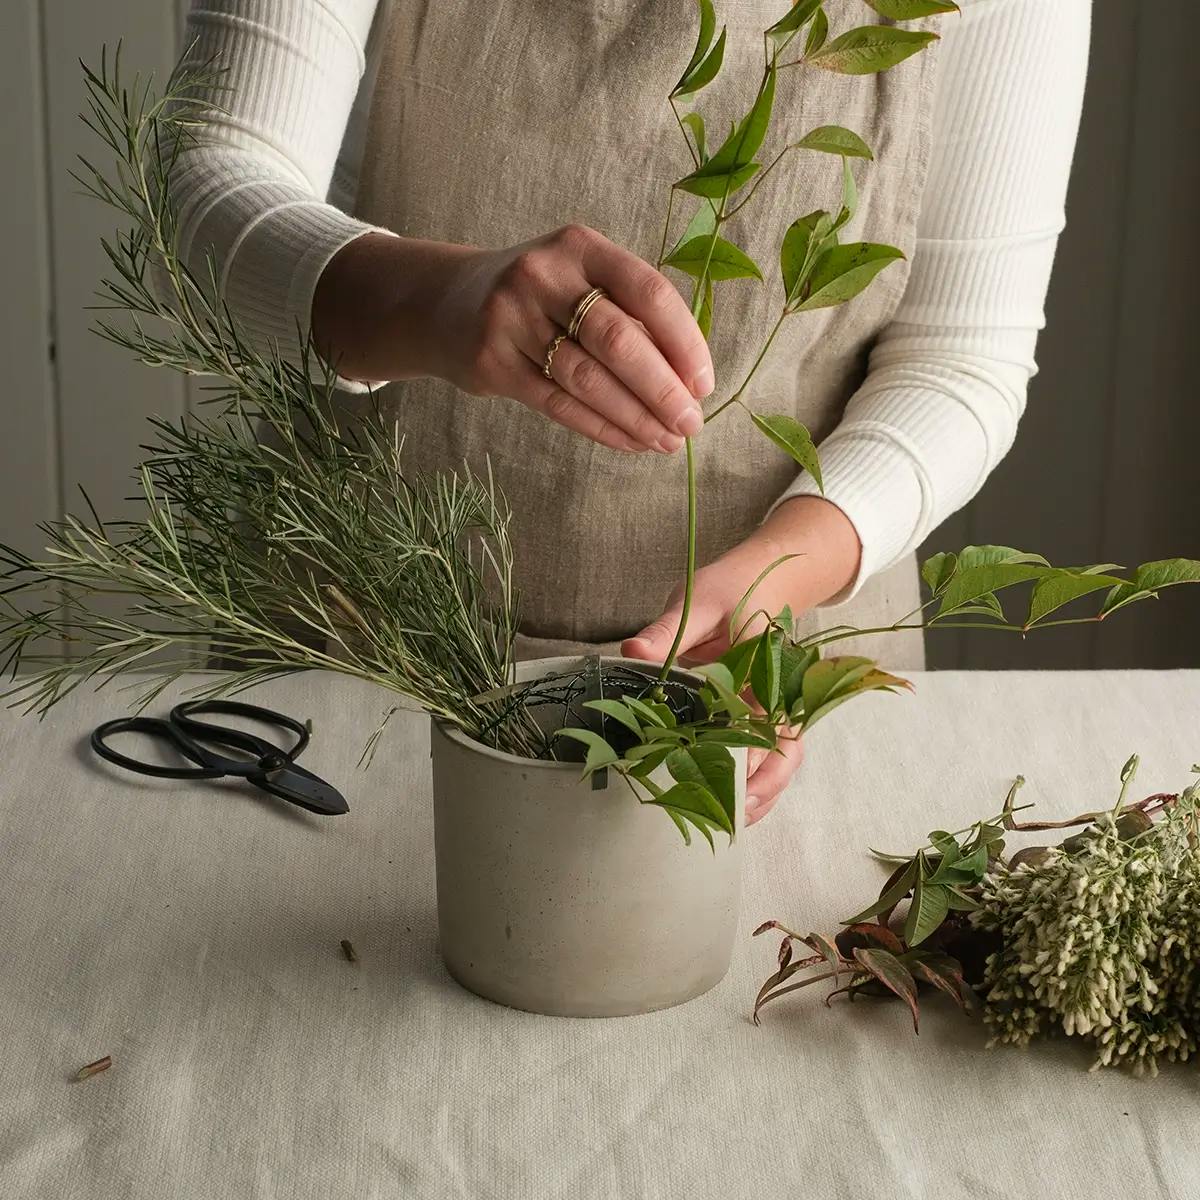 Hands adding greenery to a vase for a Christmas centerpiece.